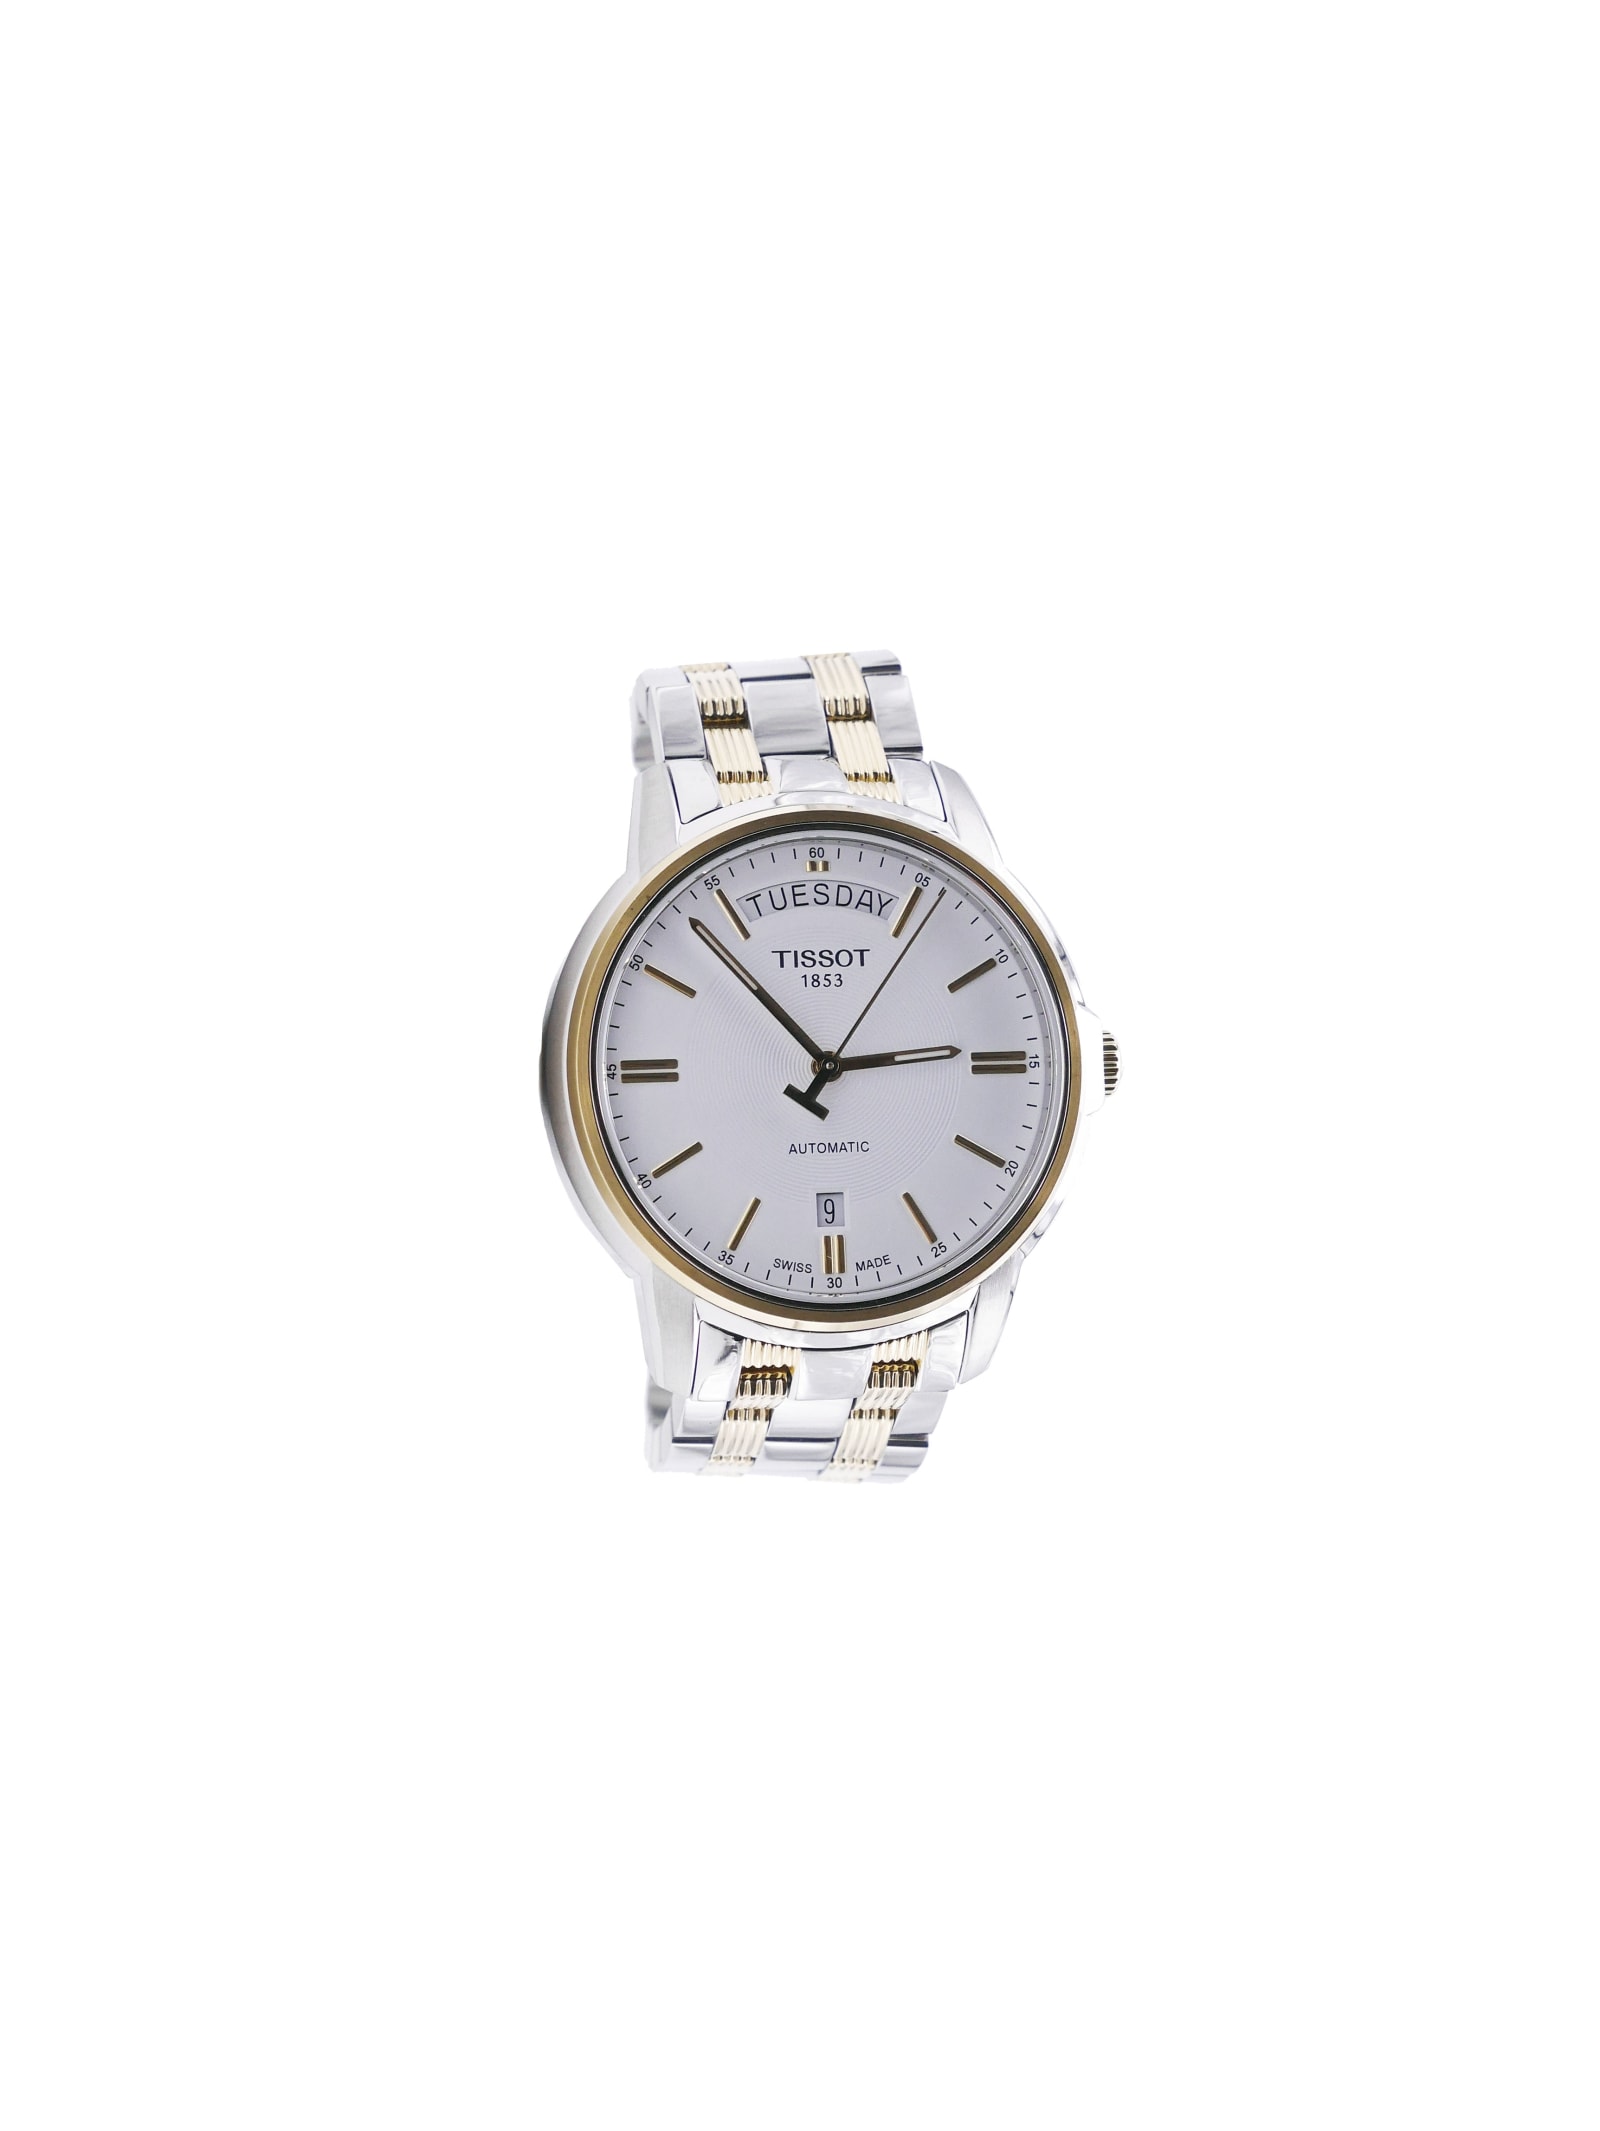 Tissot Automatic Day Date Watches